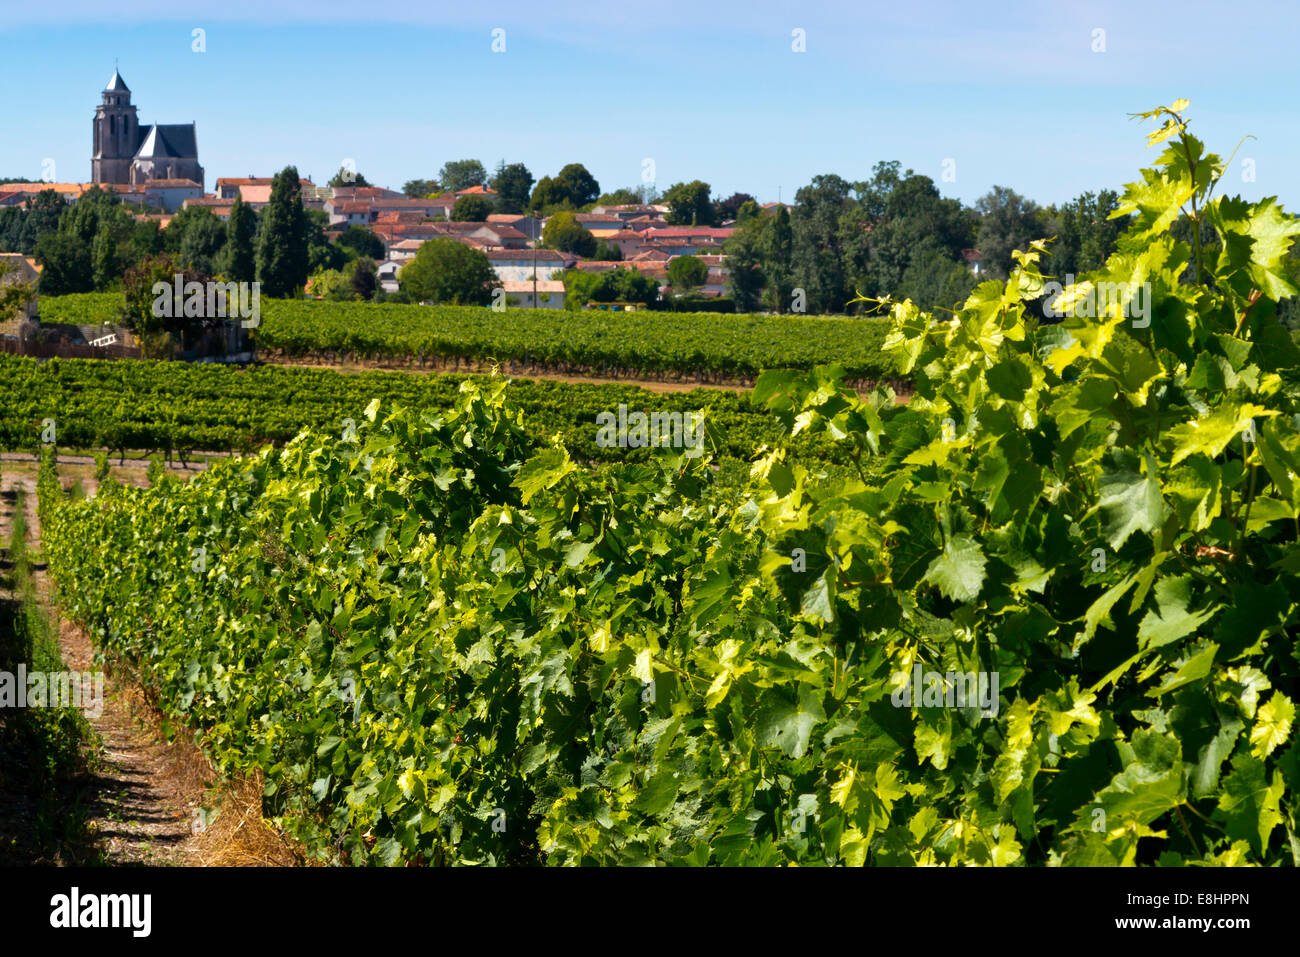 Vineyard with grapes growing in summer near the village of Lonzac in the Charente-Maritime region of south west France Stock Photo